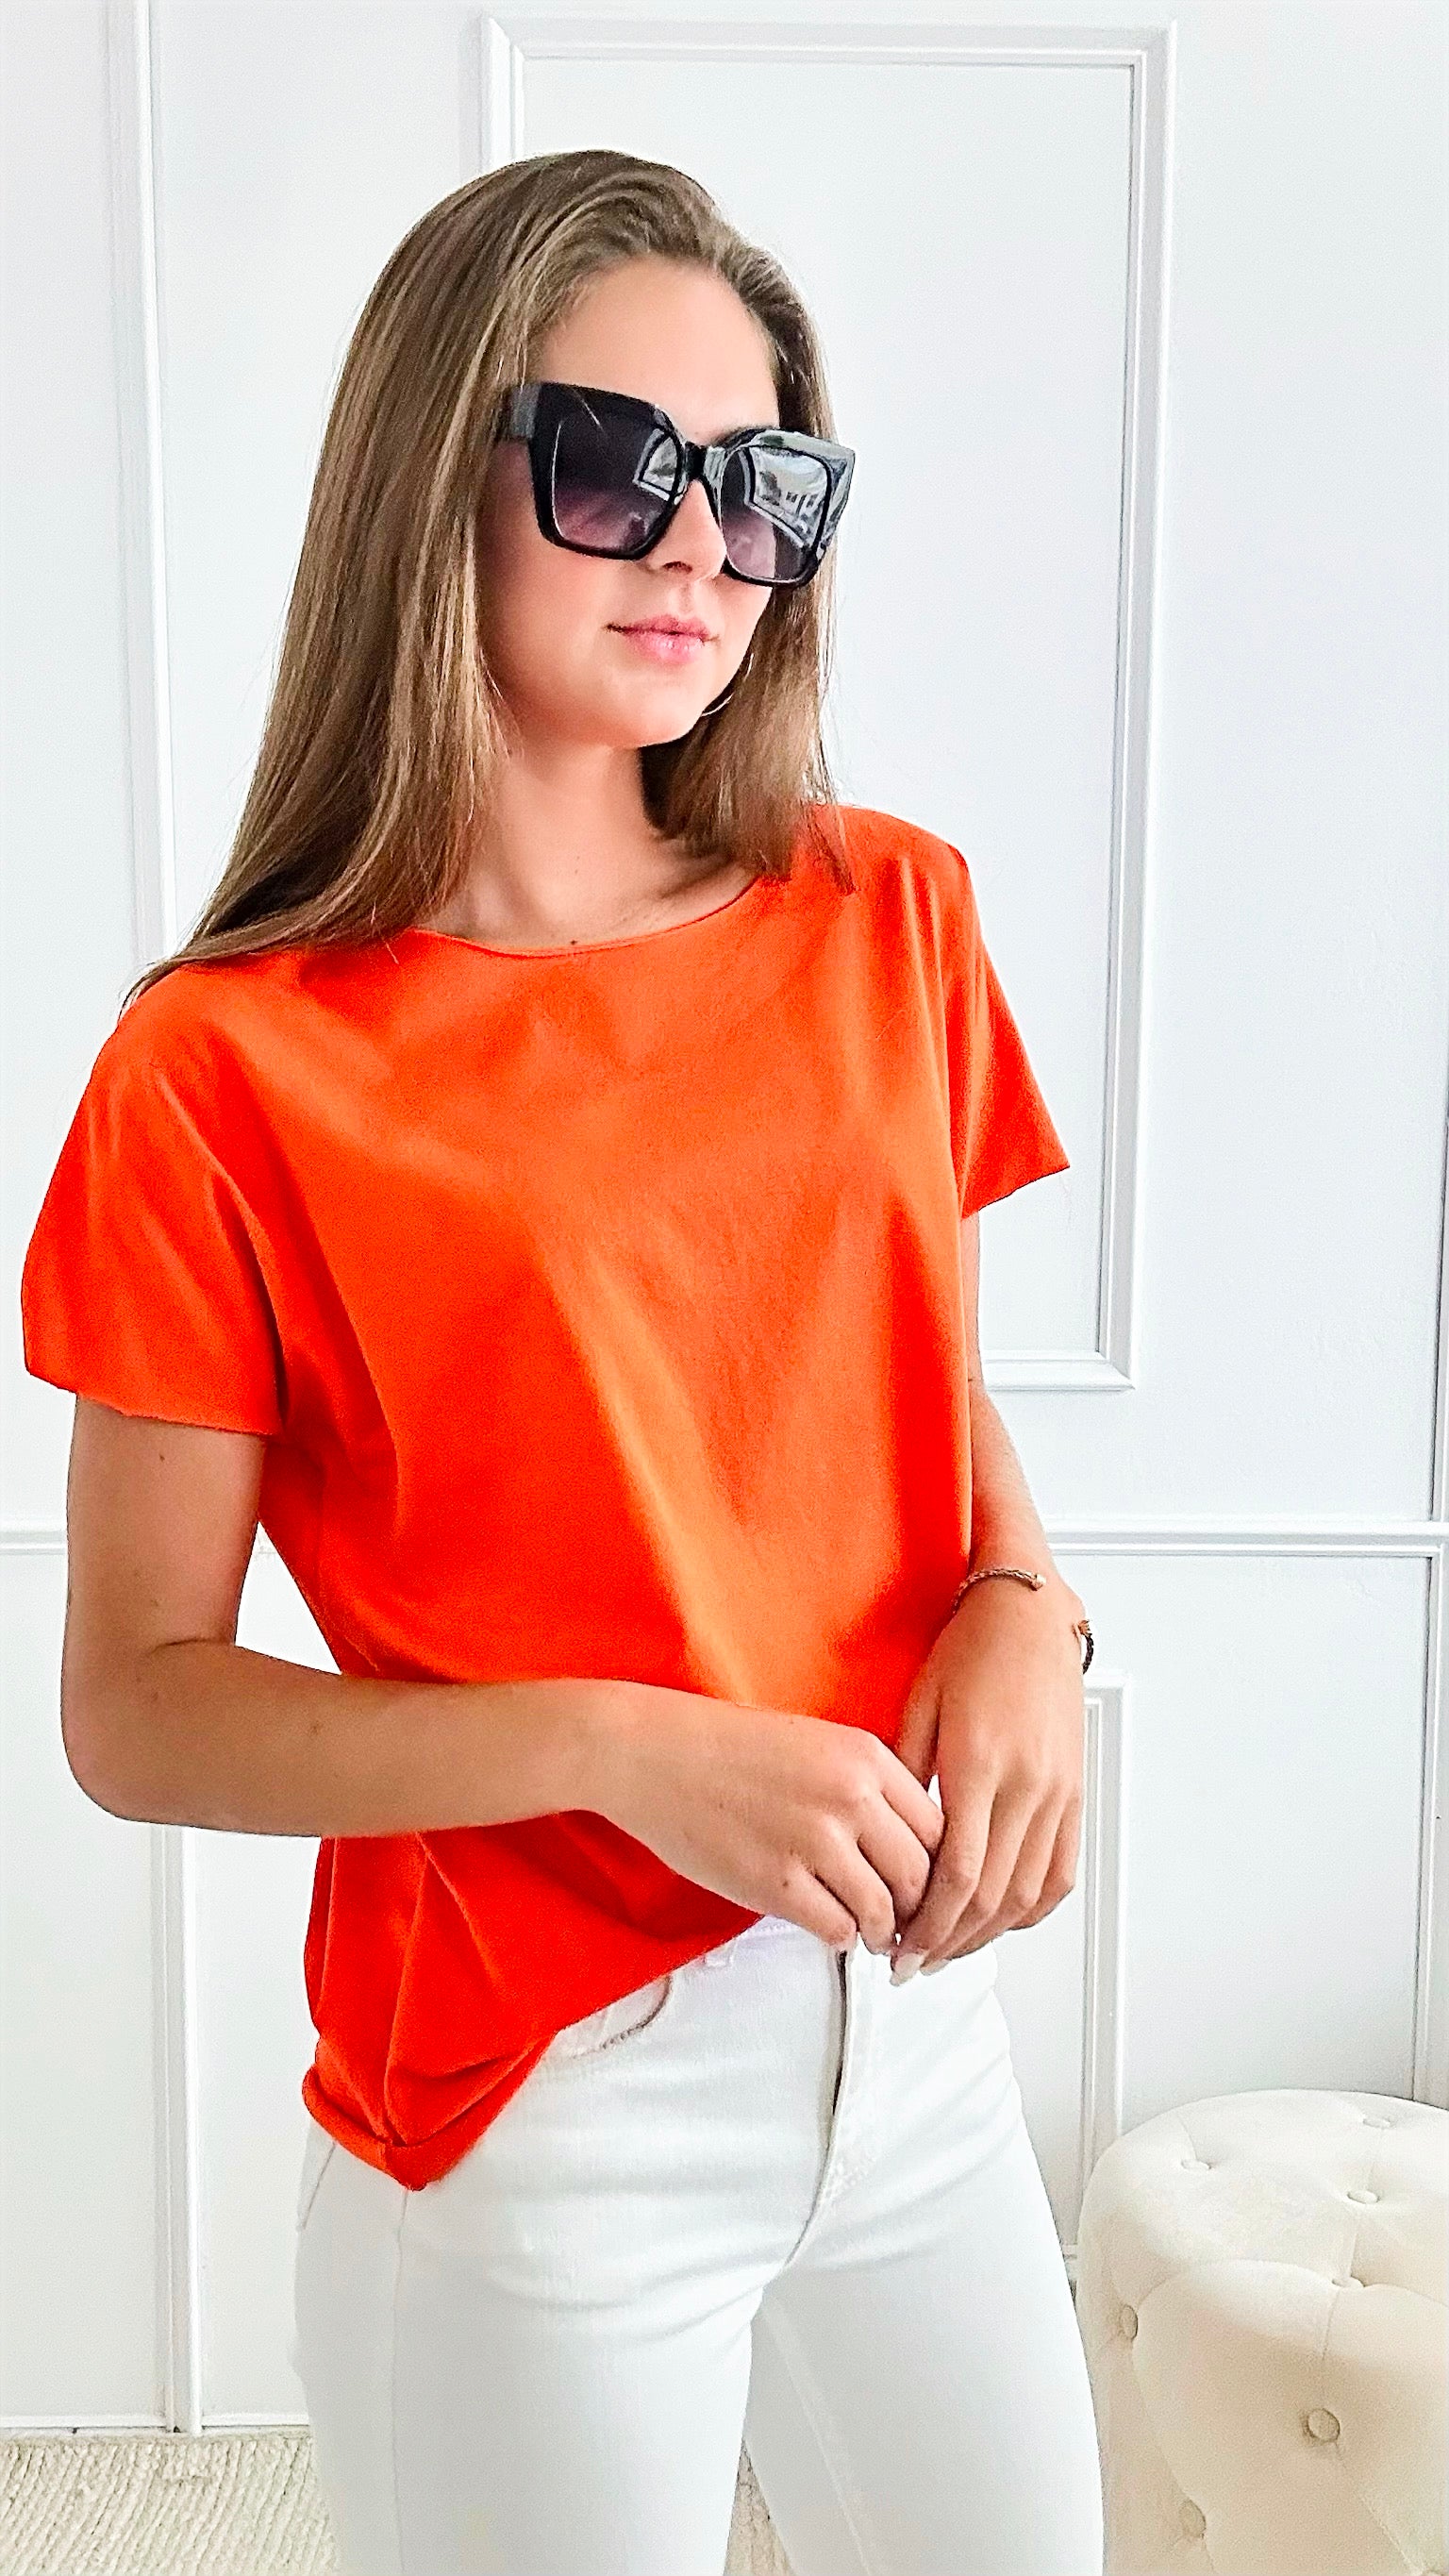 Easy Breezy Italian tee - Orange-110 Short Sleeve Tops-Italianissimo-Coastal Bloom Boutique, find the trendiest versions of the popular styles and looks Located in Indialantic, FL